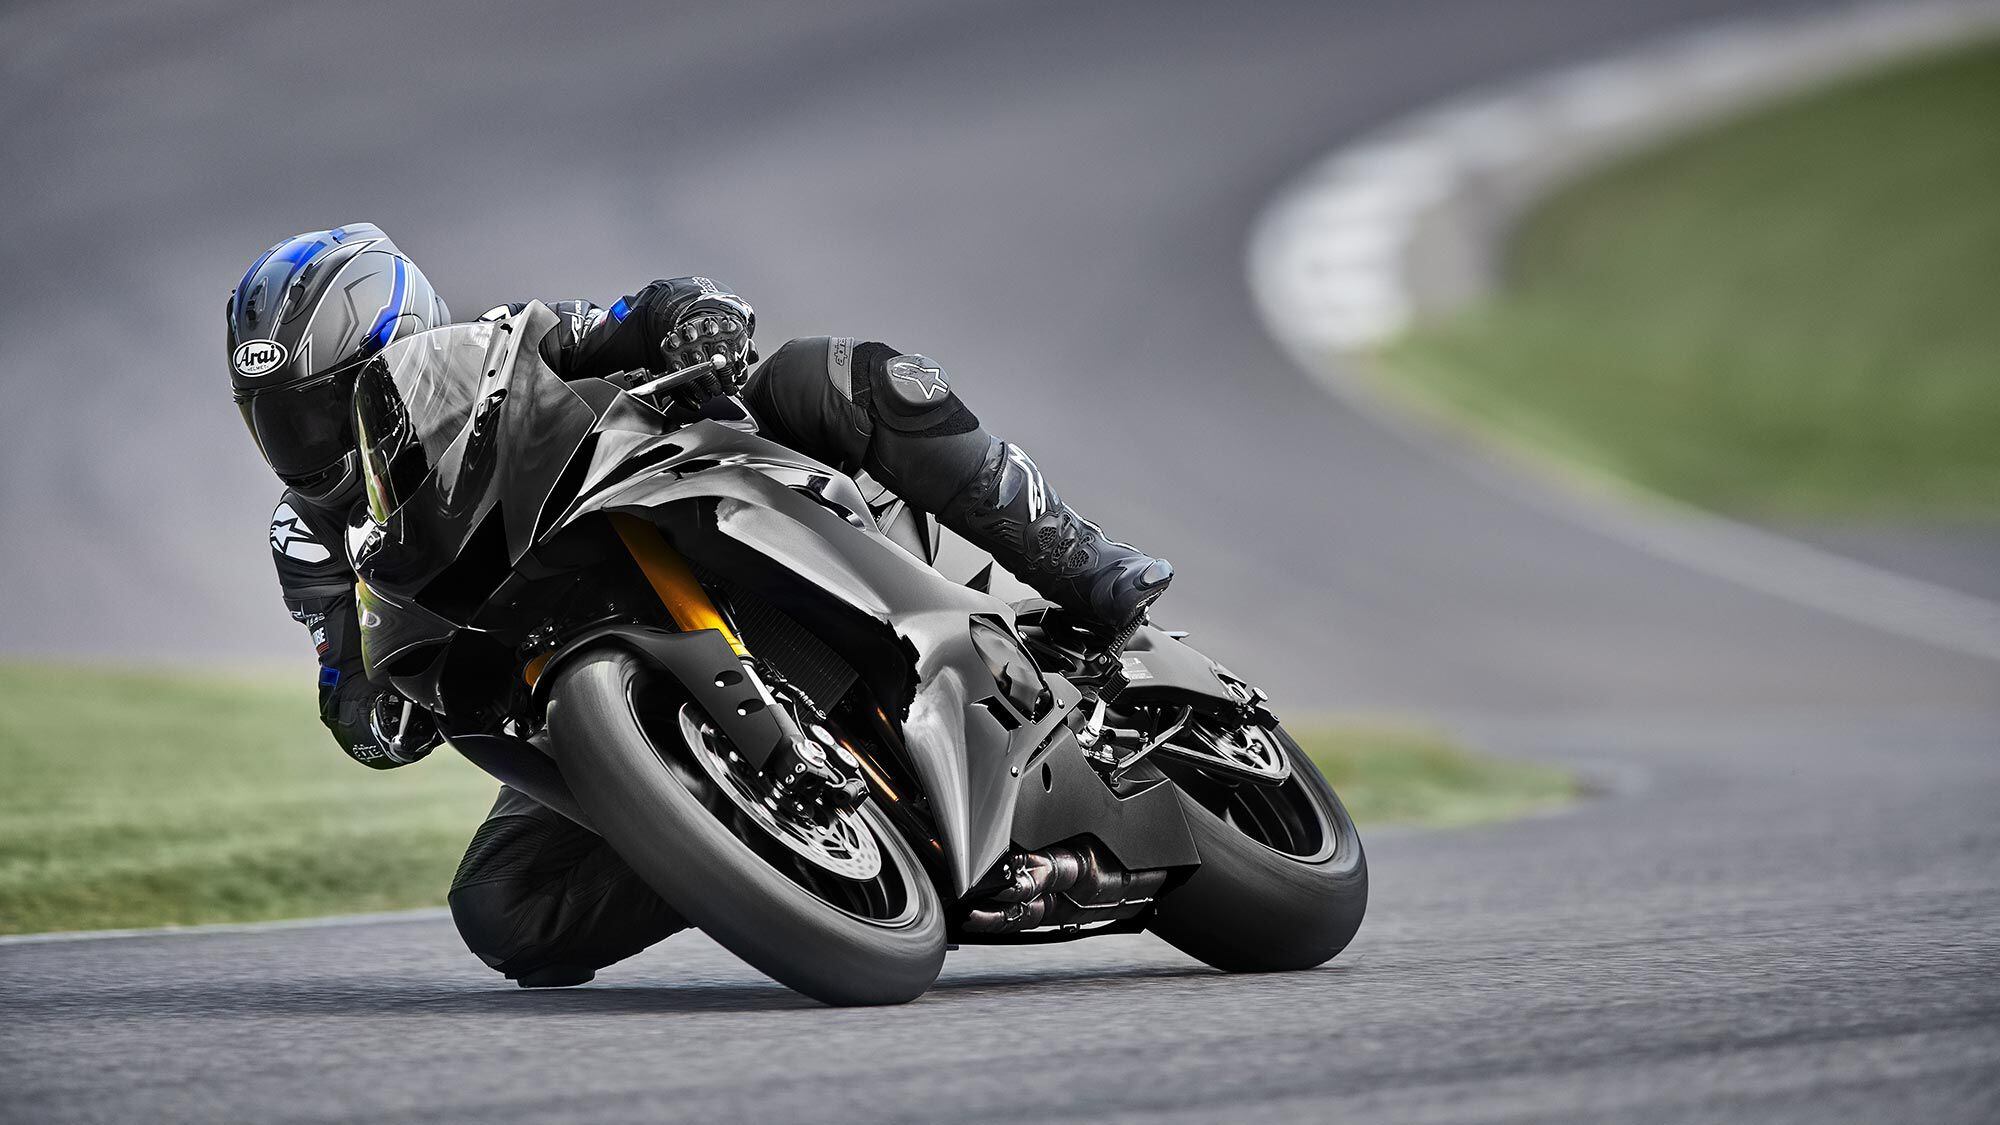 The YZF-R6 Race jettisons all street-legal componentry including the LED headlights, position lights, rearview mirrors, horn, licence plate holder, and passenger seat and footrests.